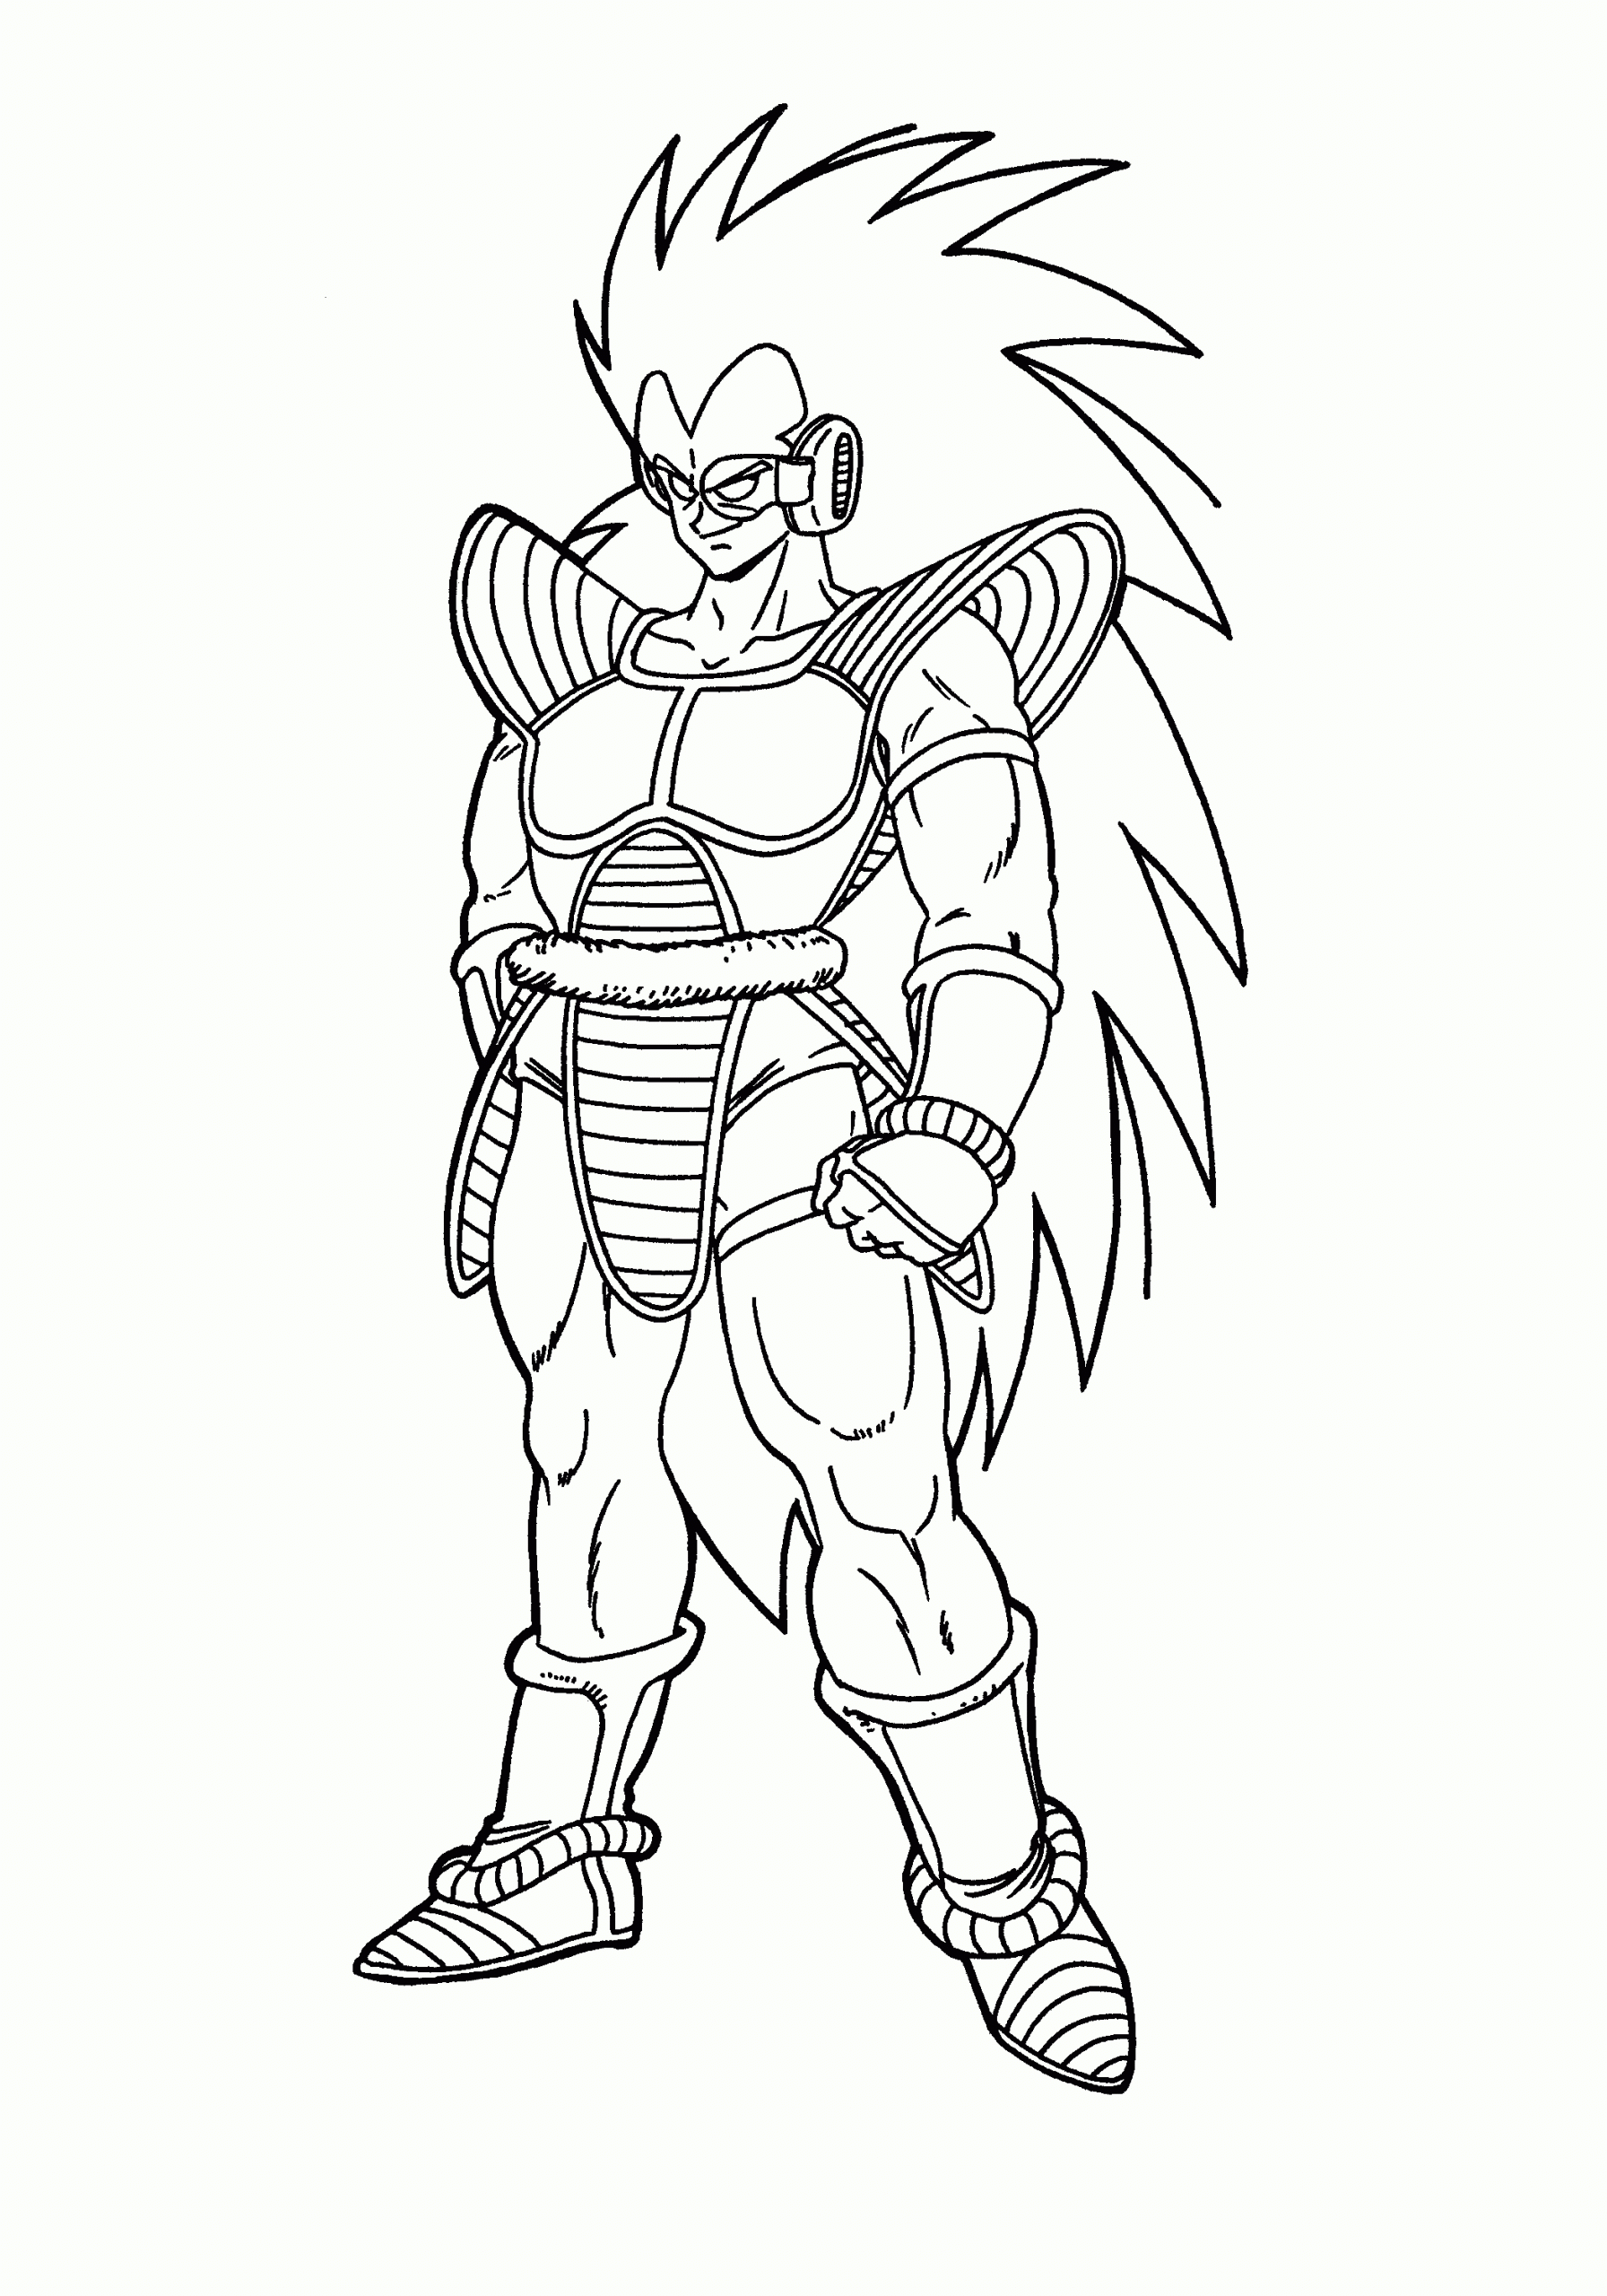 Free Printable Dragon Ball Z Coloring Pages For Kids dedans Dessin Coloriage Dragon Ball Z